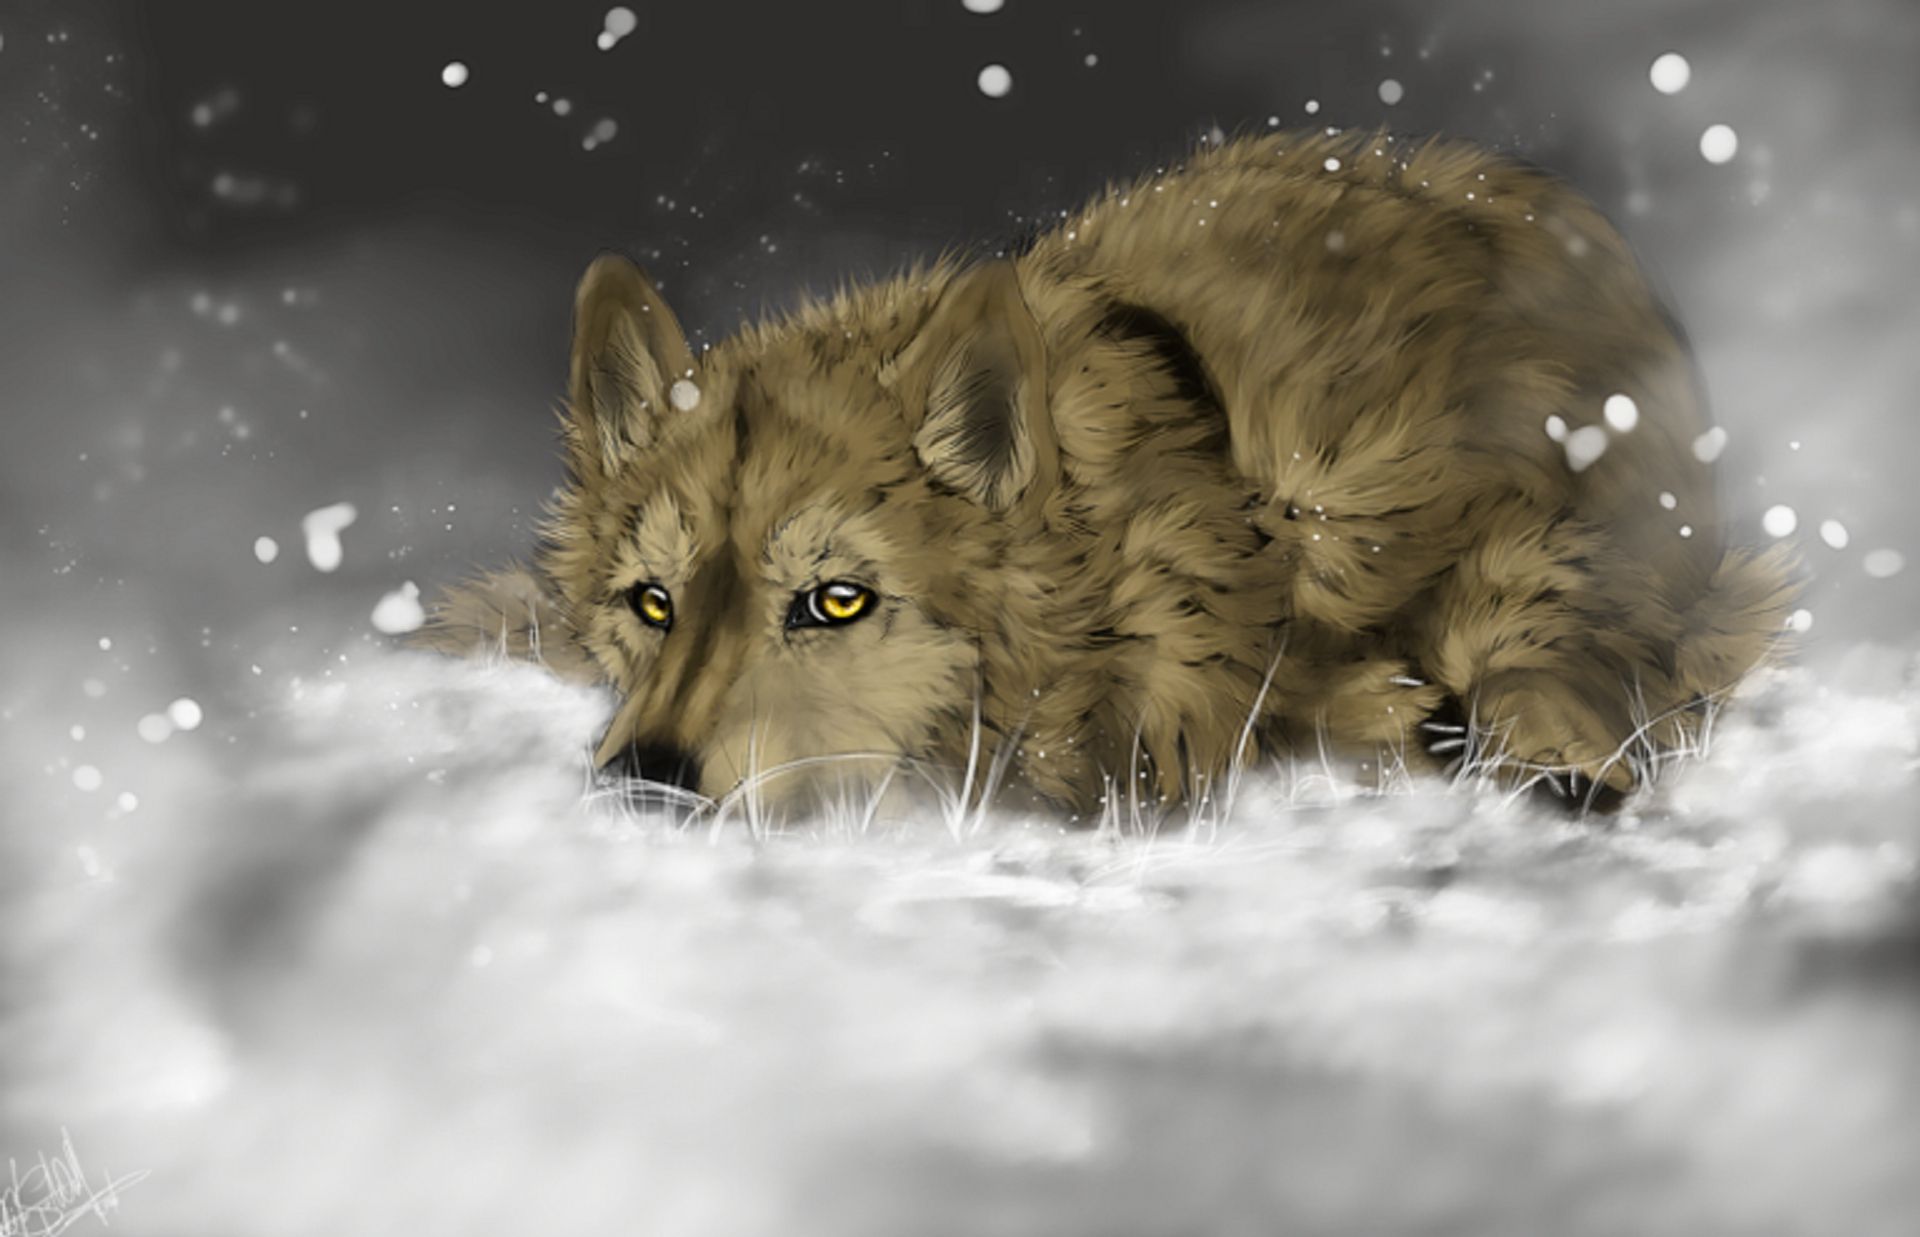 painted, animals, painting, snow, wolves, wolf wallpaper